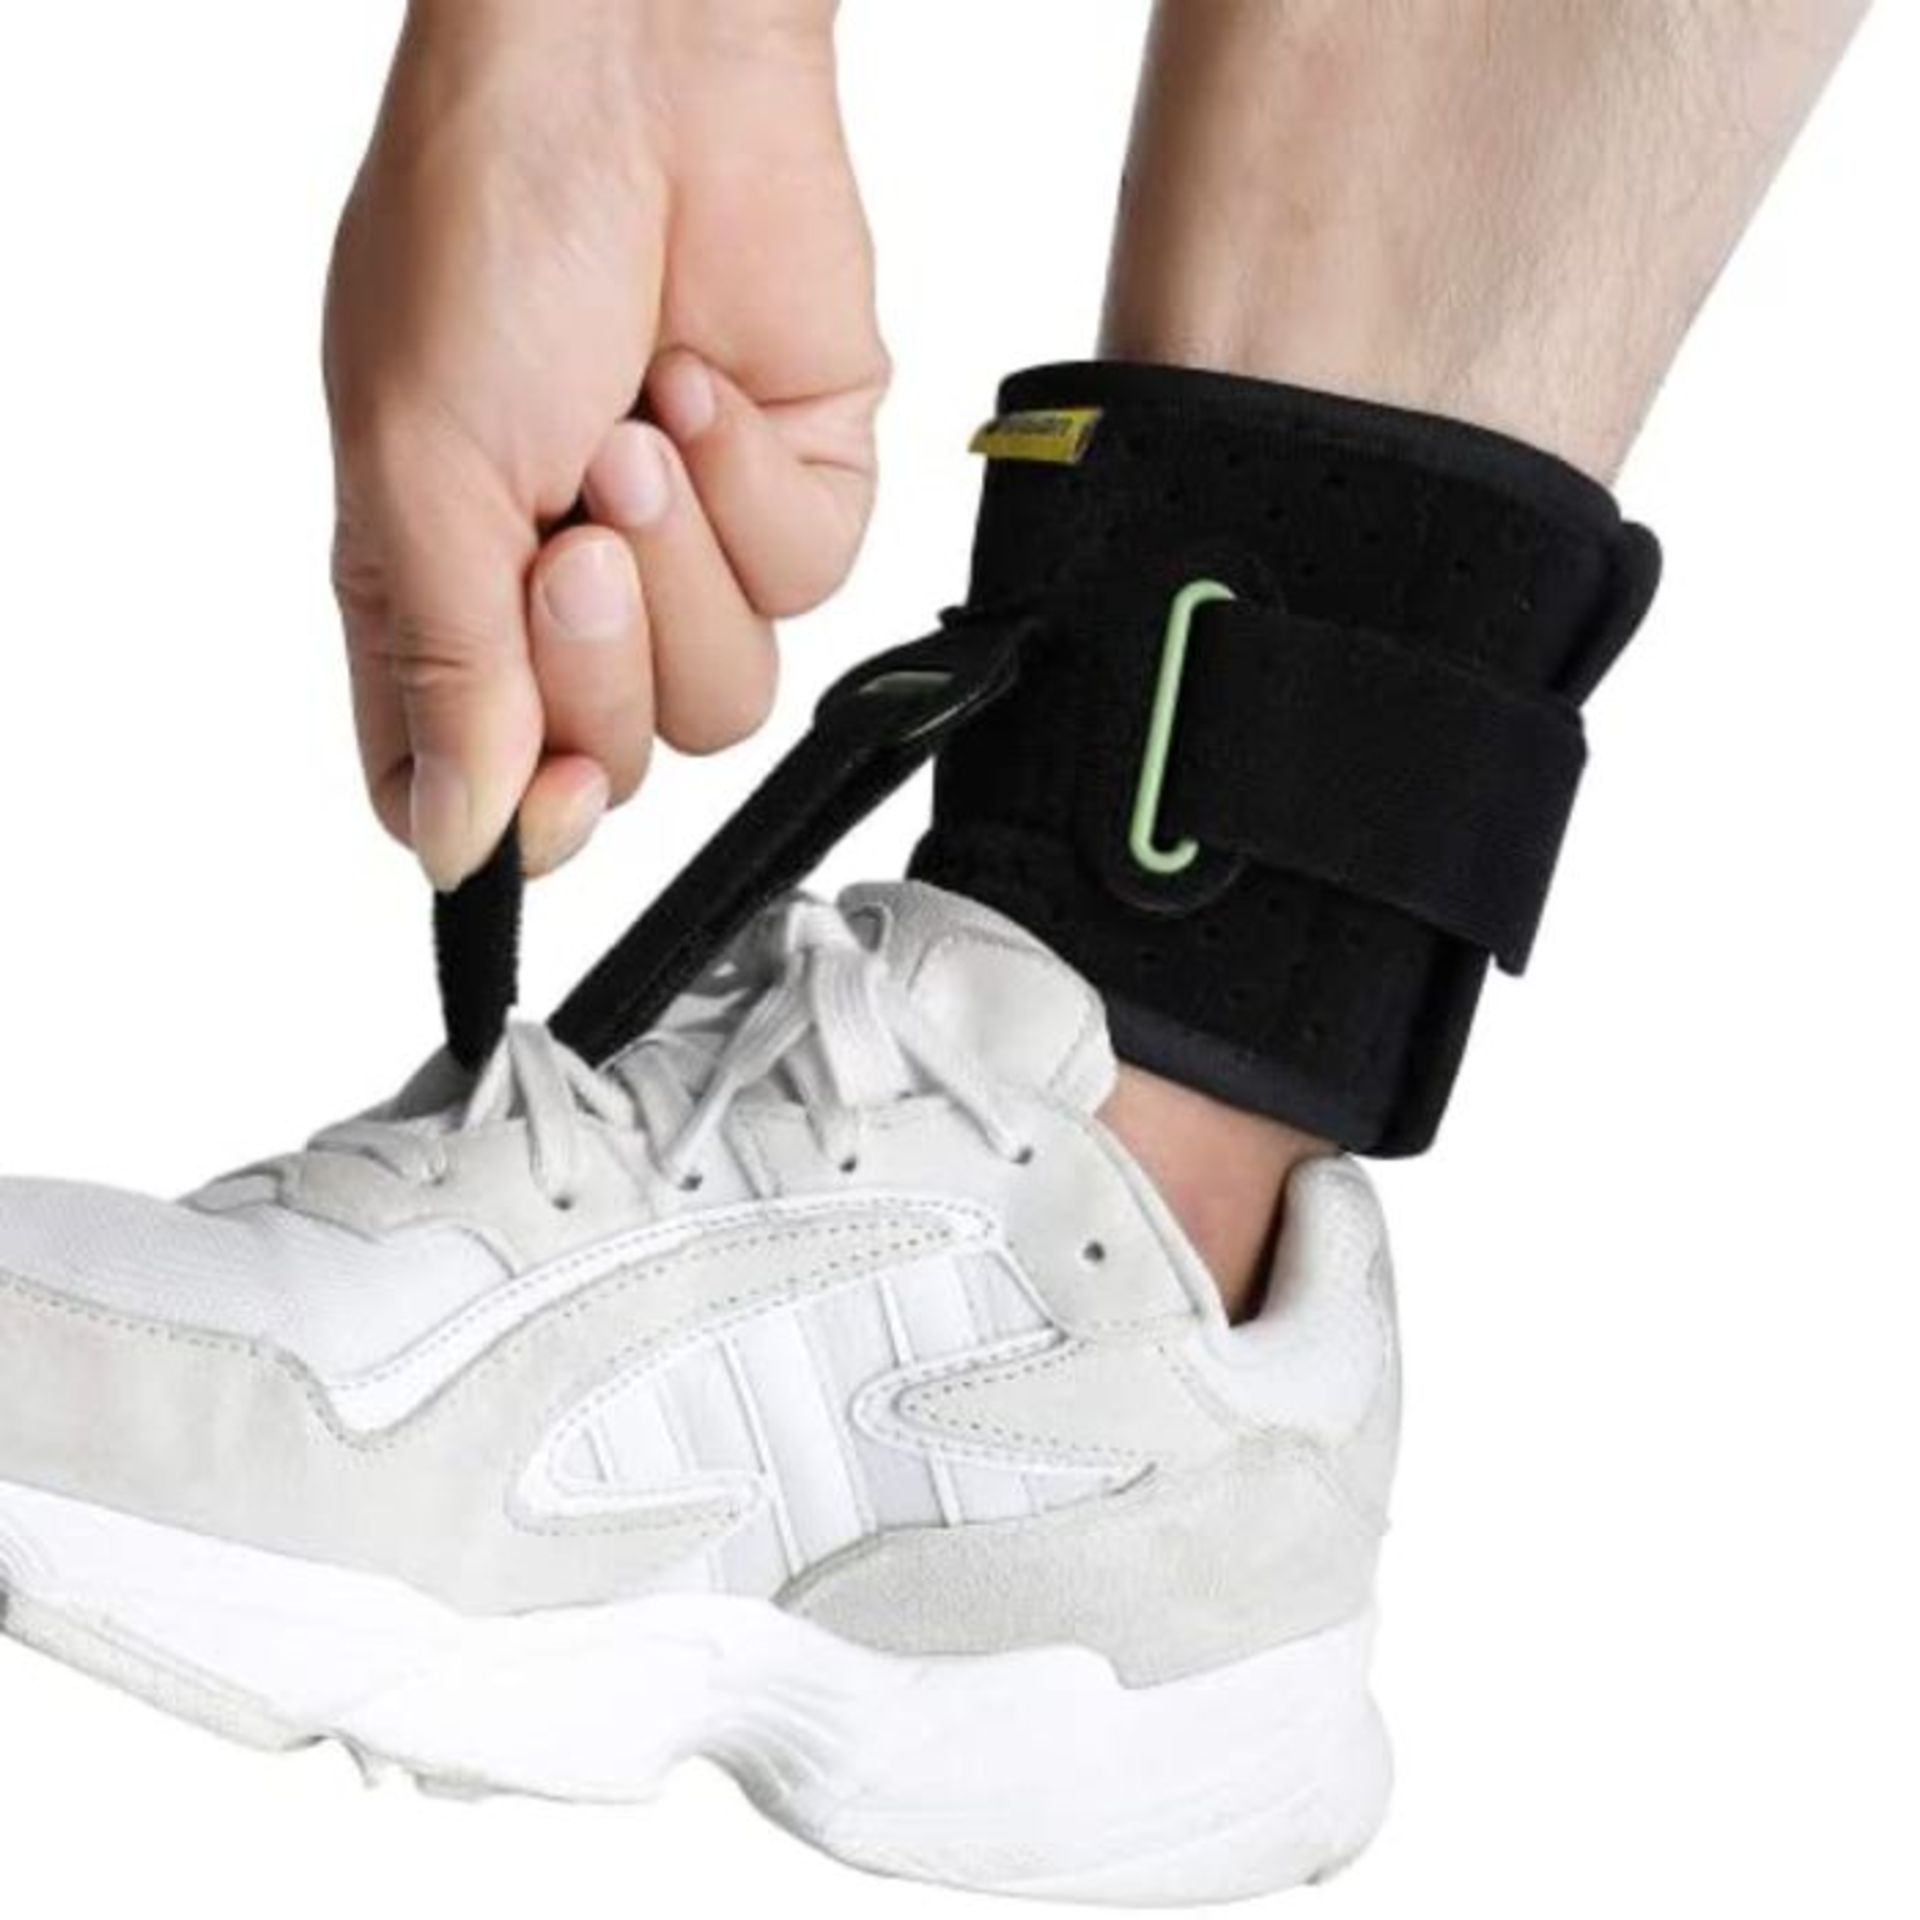 Tenbon Foot Up Orthosis Foot Drop Splint for Ankle Joint Plantar Fasciitis Relieve Pai